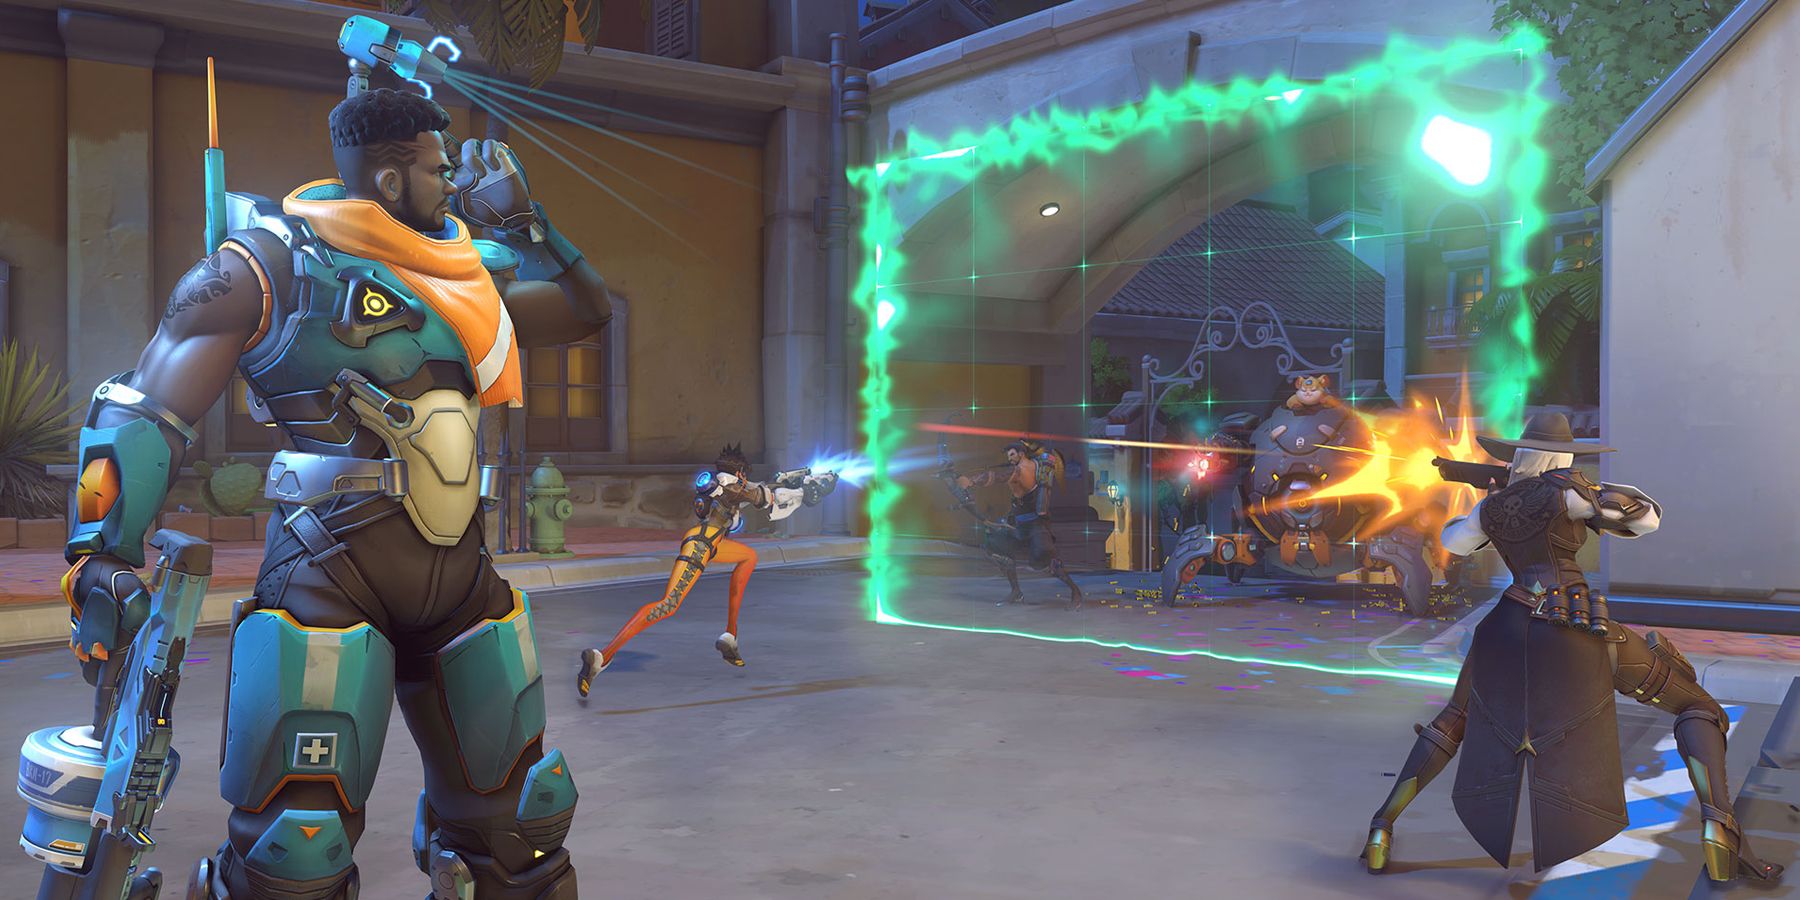 Baptiste, Tracer, and Ashe fight against Hanzo and Wreckingball on the Dorado map in Overwatch.